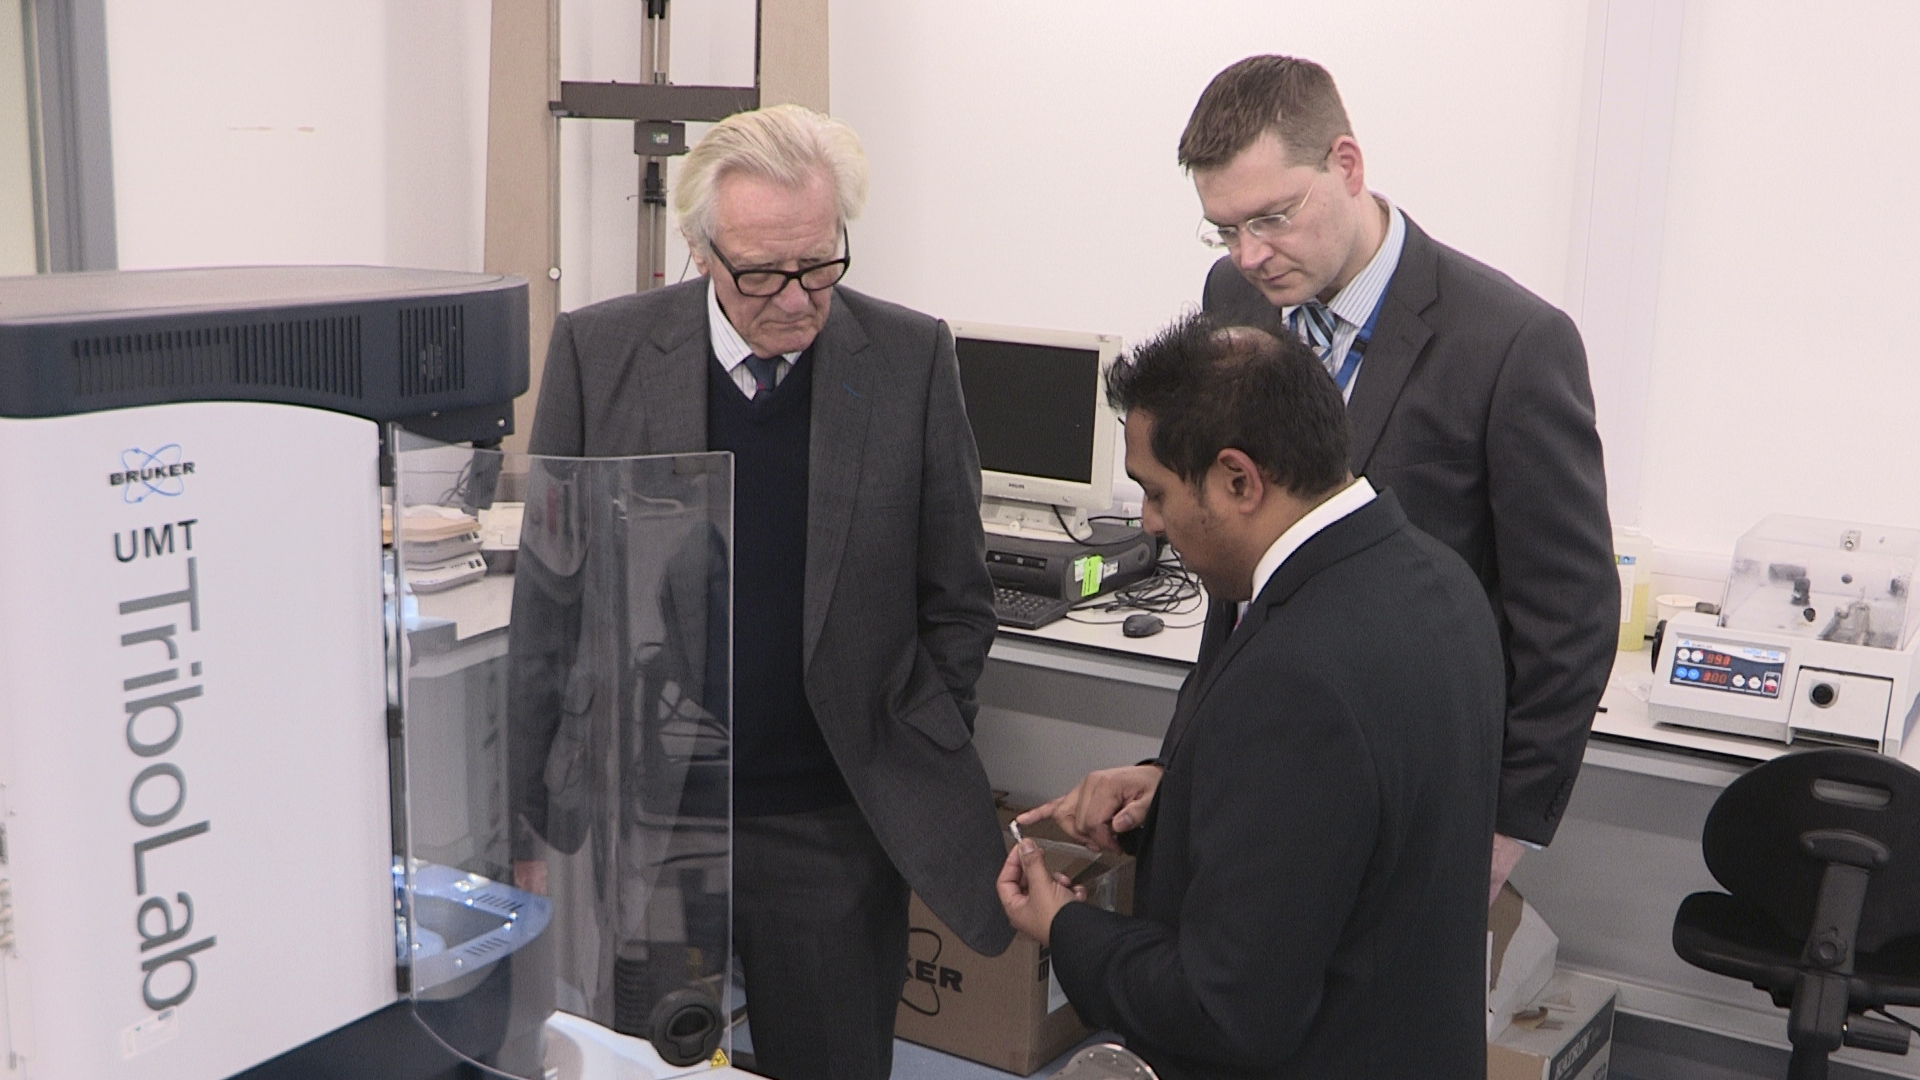 TWI's Amit Rana demonstrates the effects and measurement of frictional force on surfaces in constant contact with Lord Heseltine and TWI Operations Director Mike Russell